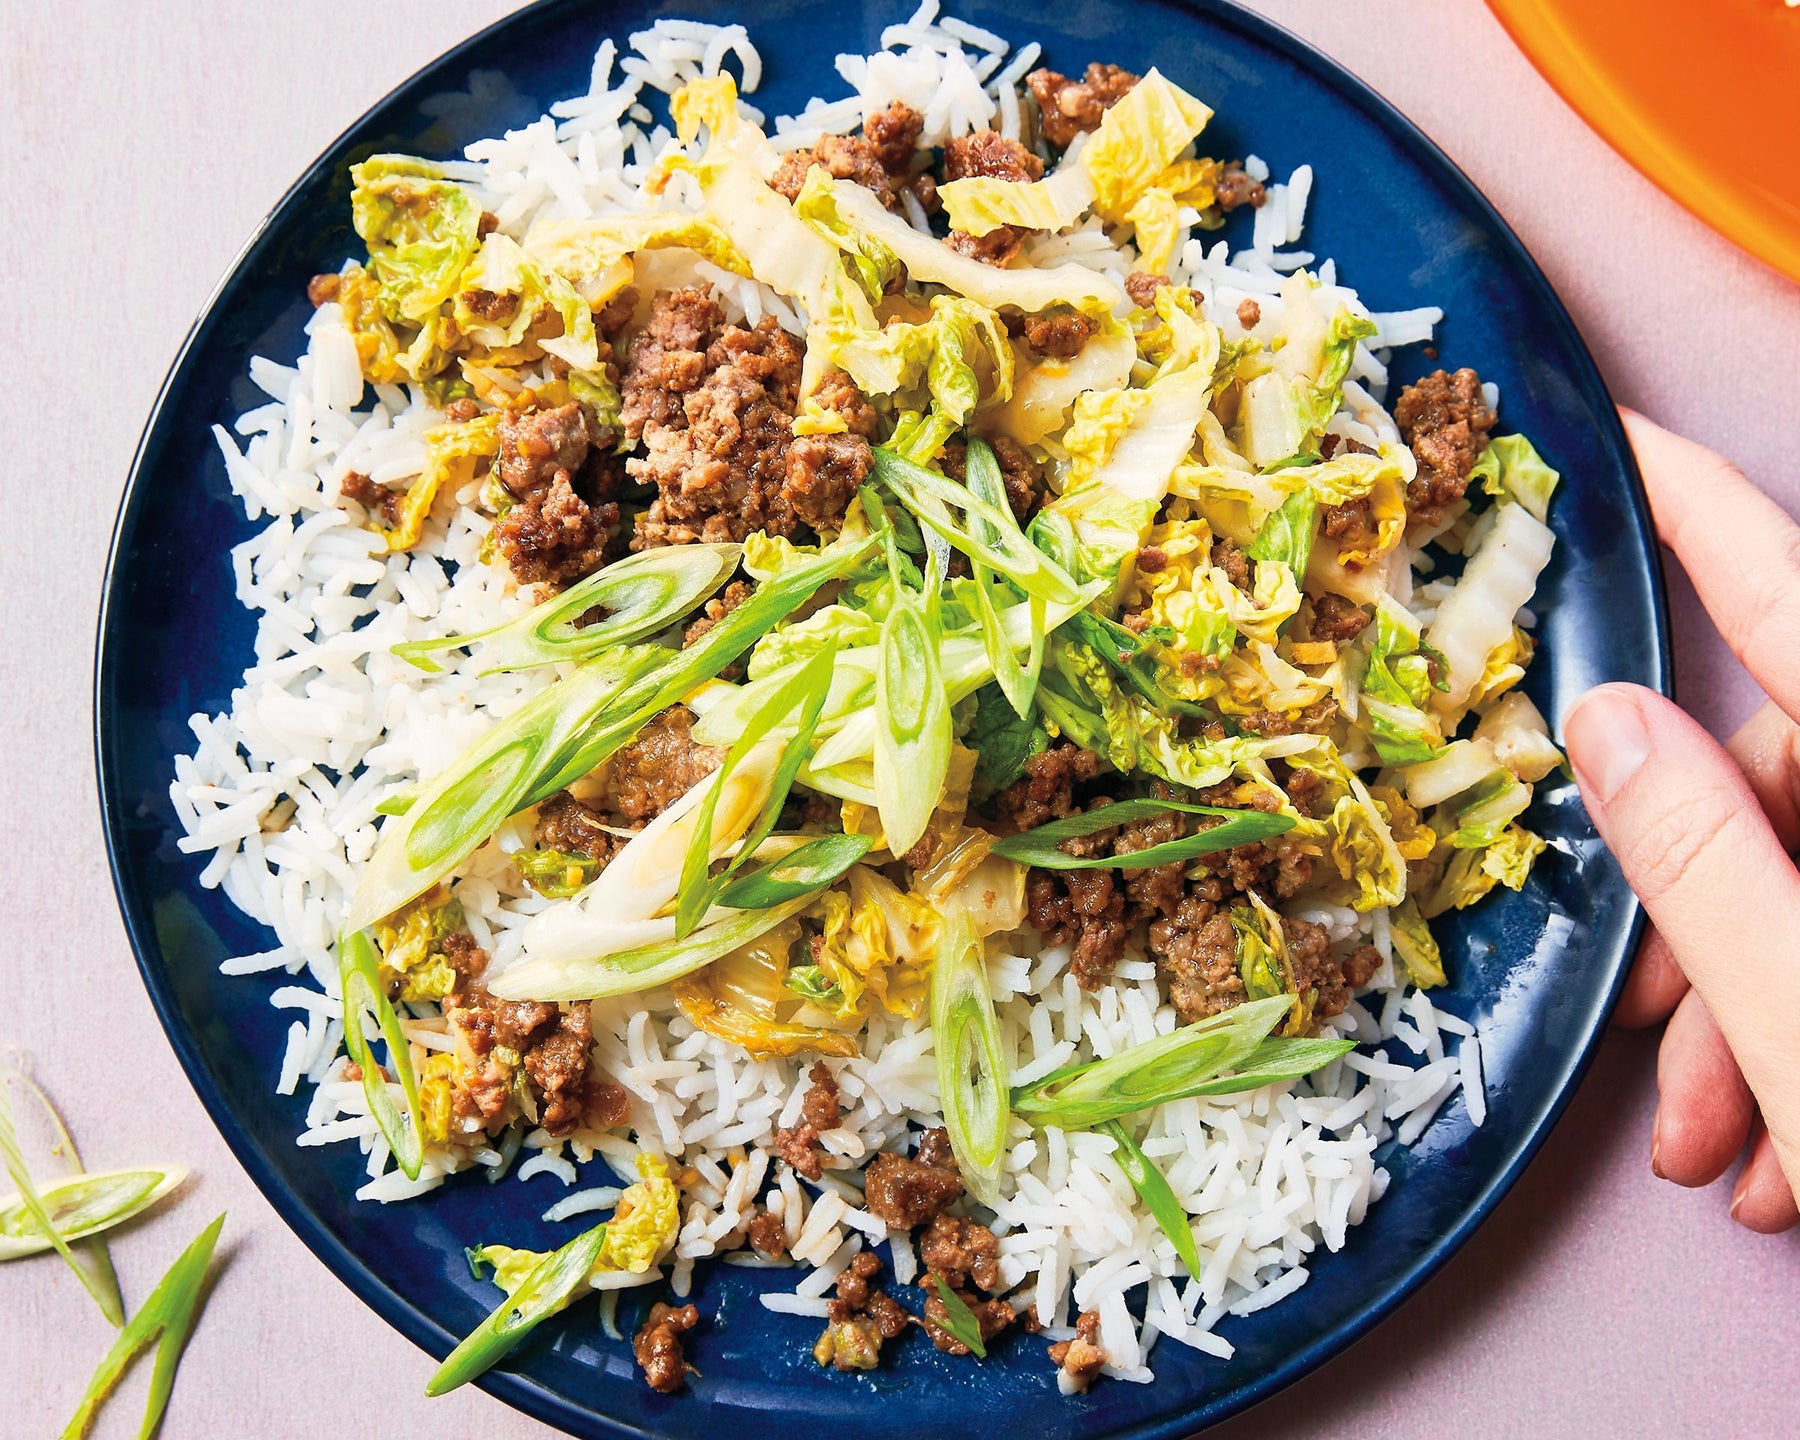 CLAIRE TANSEY'S STICKY KOREAN BEEF